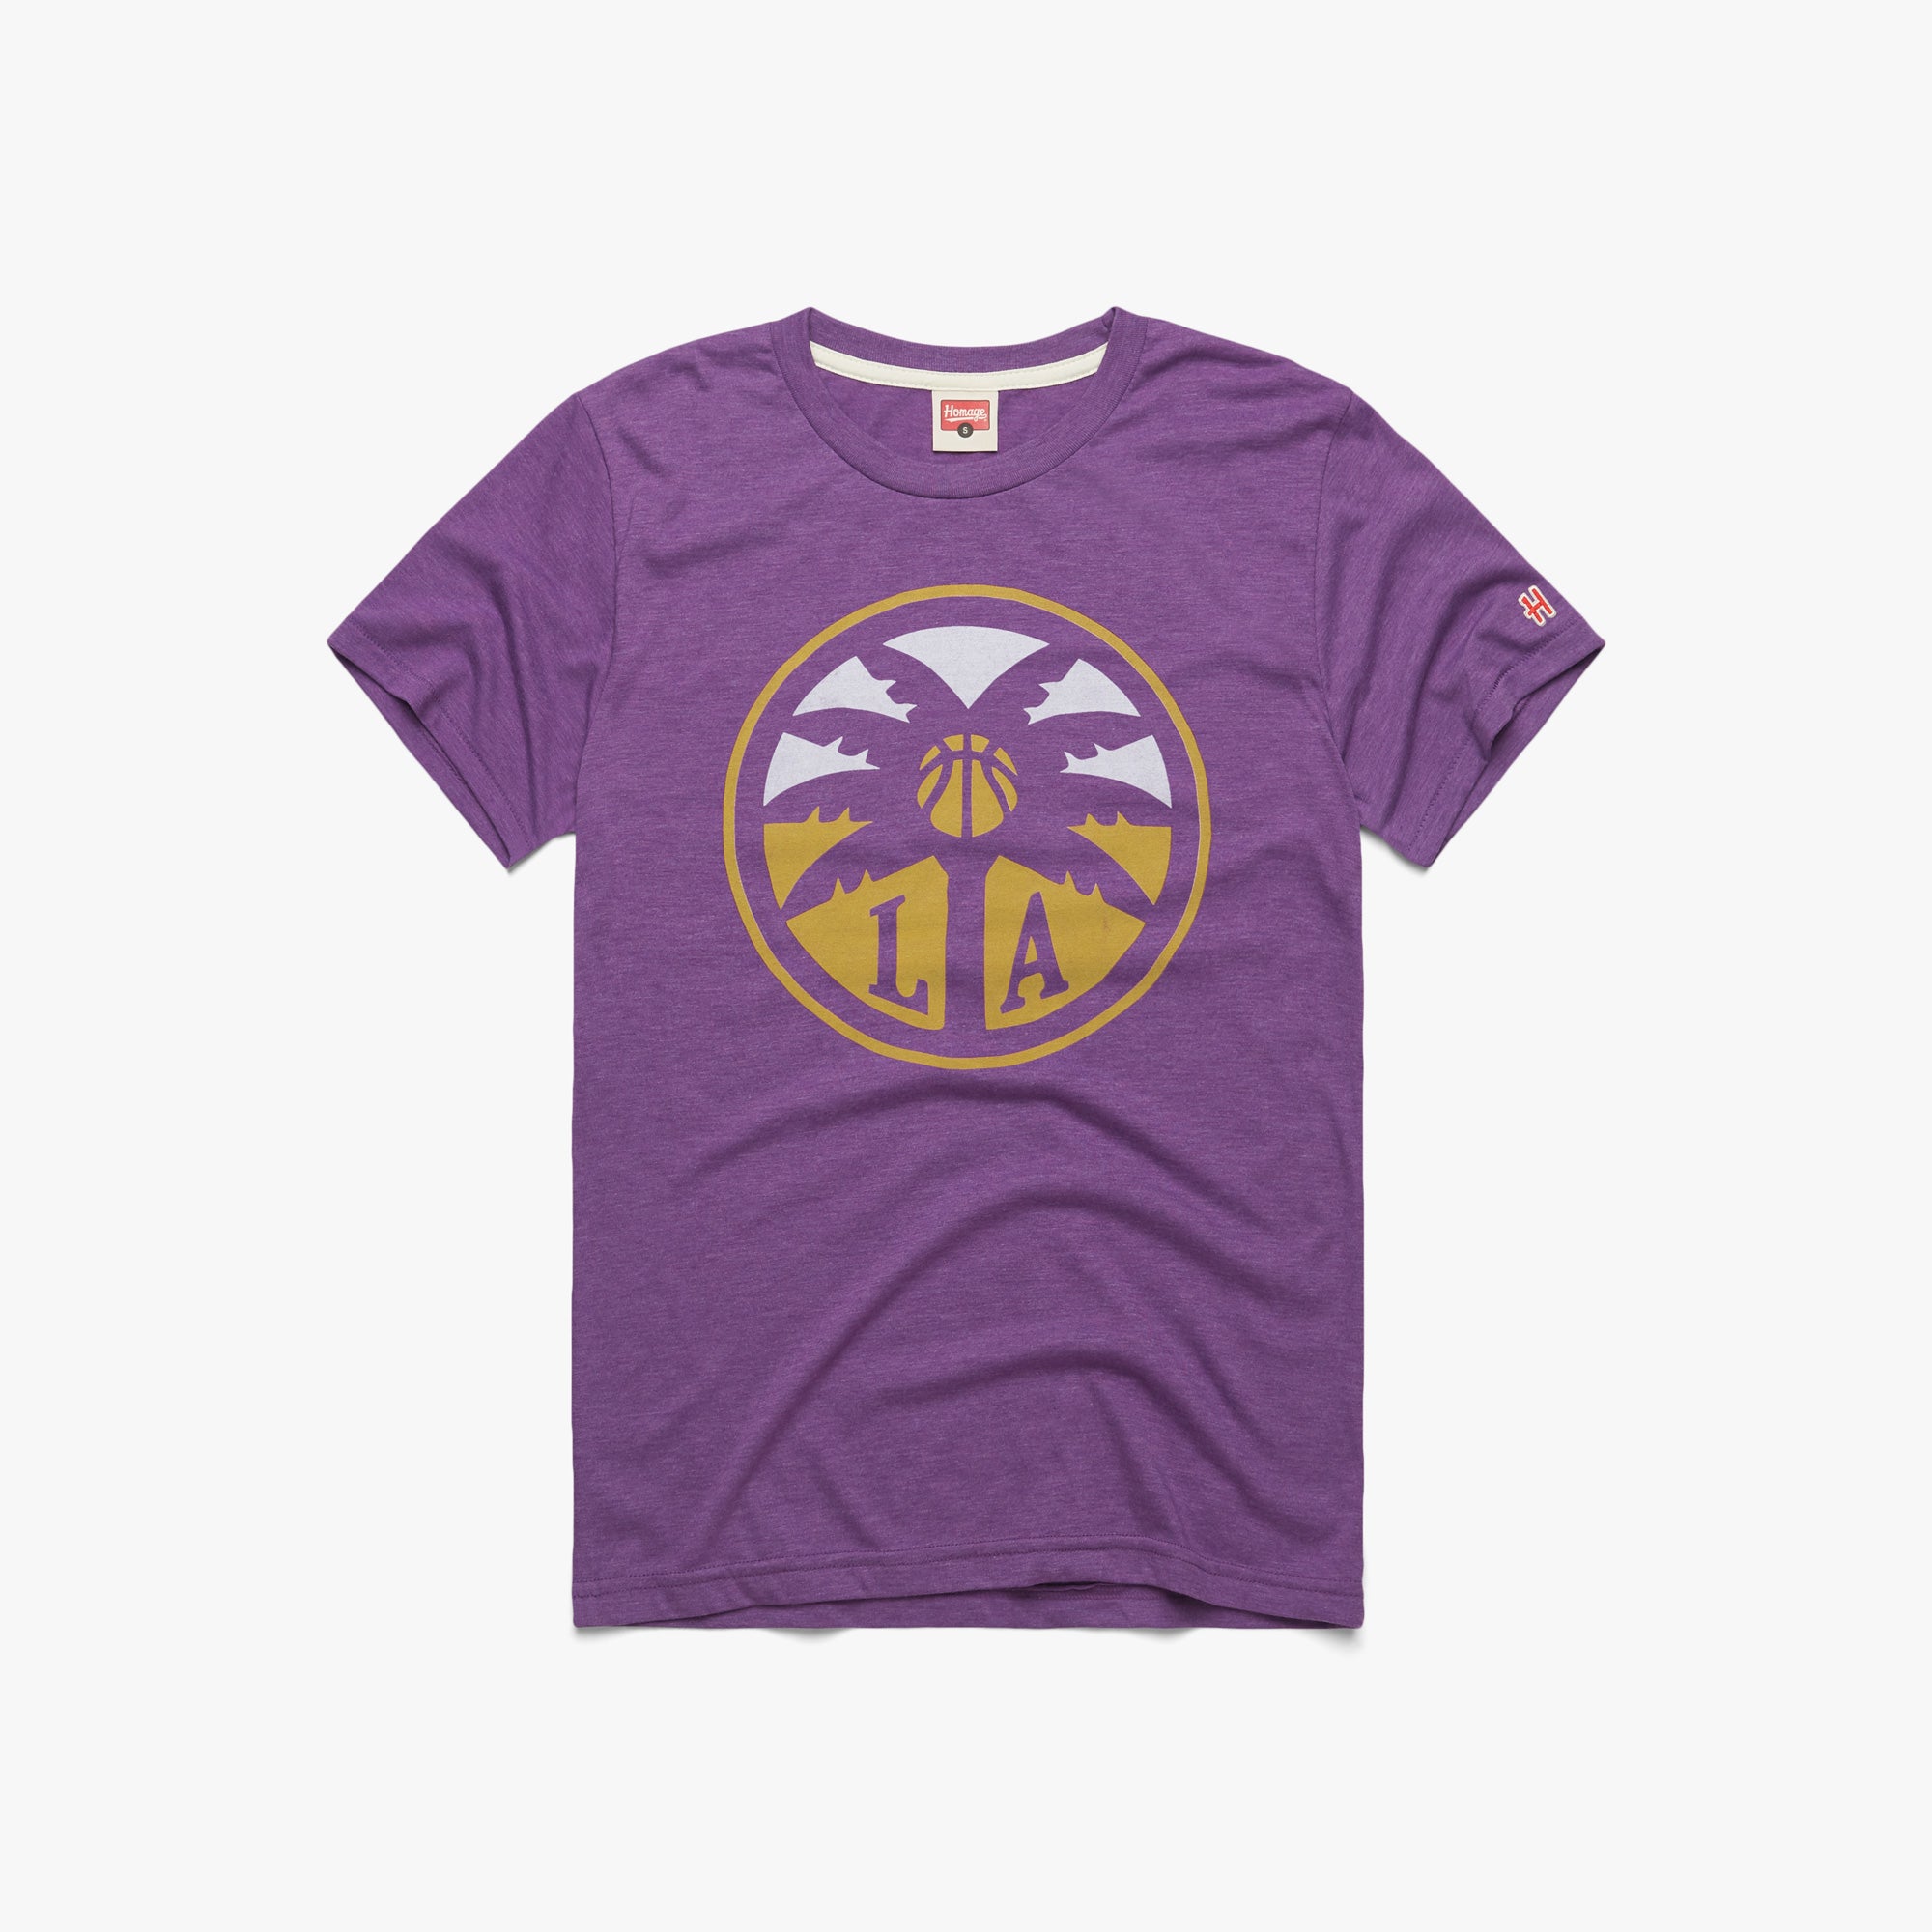 Los Angeles Sparks Logo T-Shirt from Homage. | Royal Purple | Vintage Apparel from Homage.